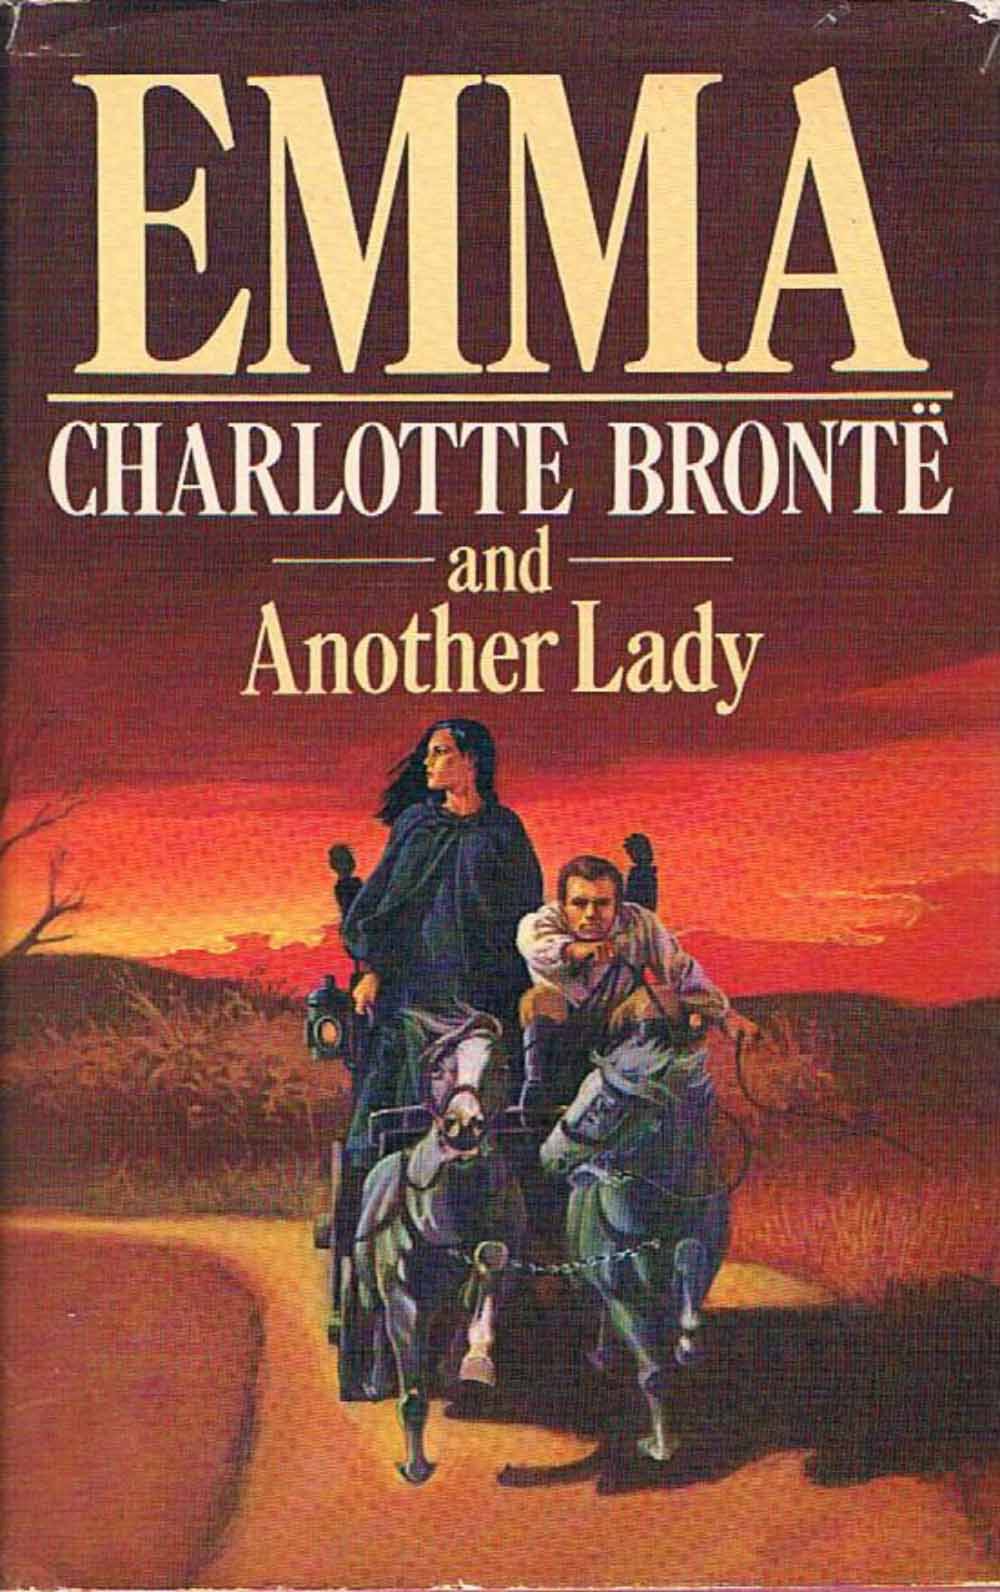 Emma Book Cover Charlotte Bronte and Another Lady